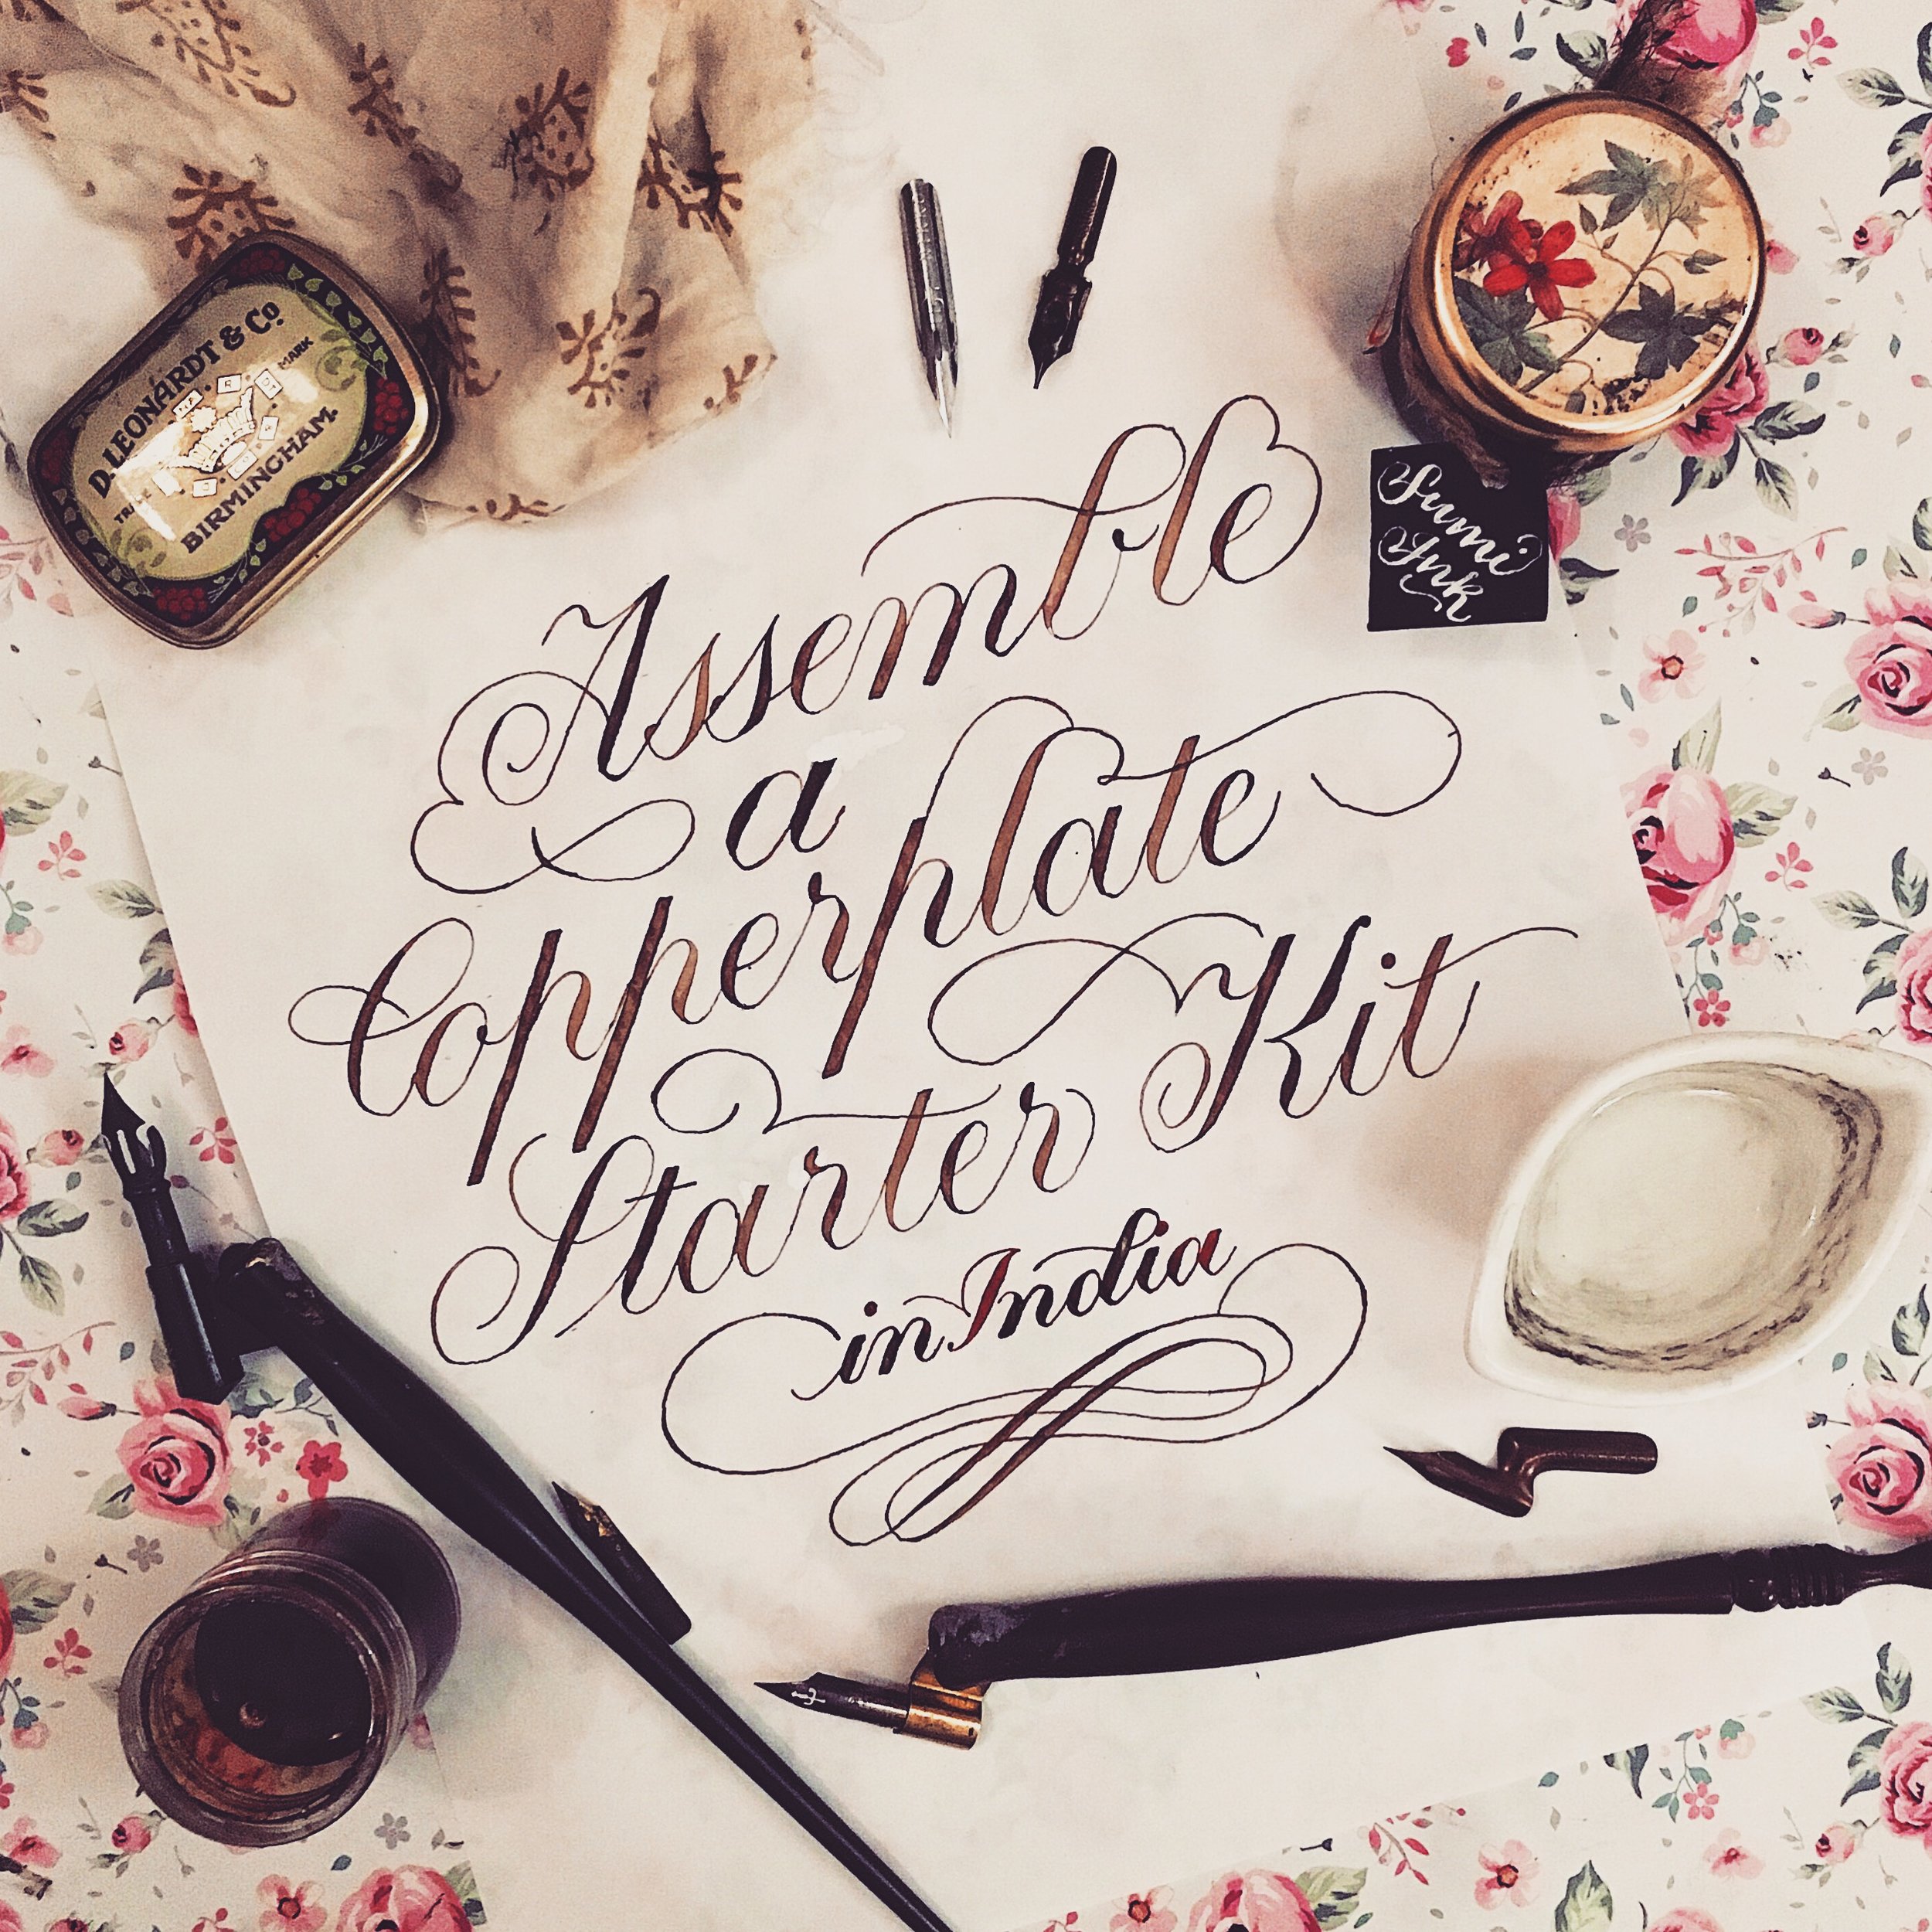 Back in stock: Brush Calligraphy Kits to learn lettering in India